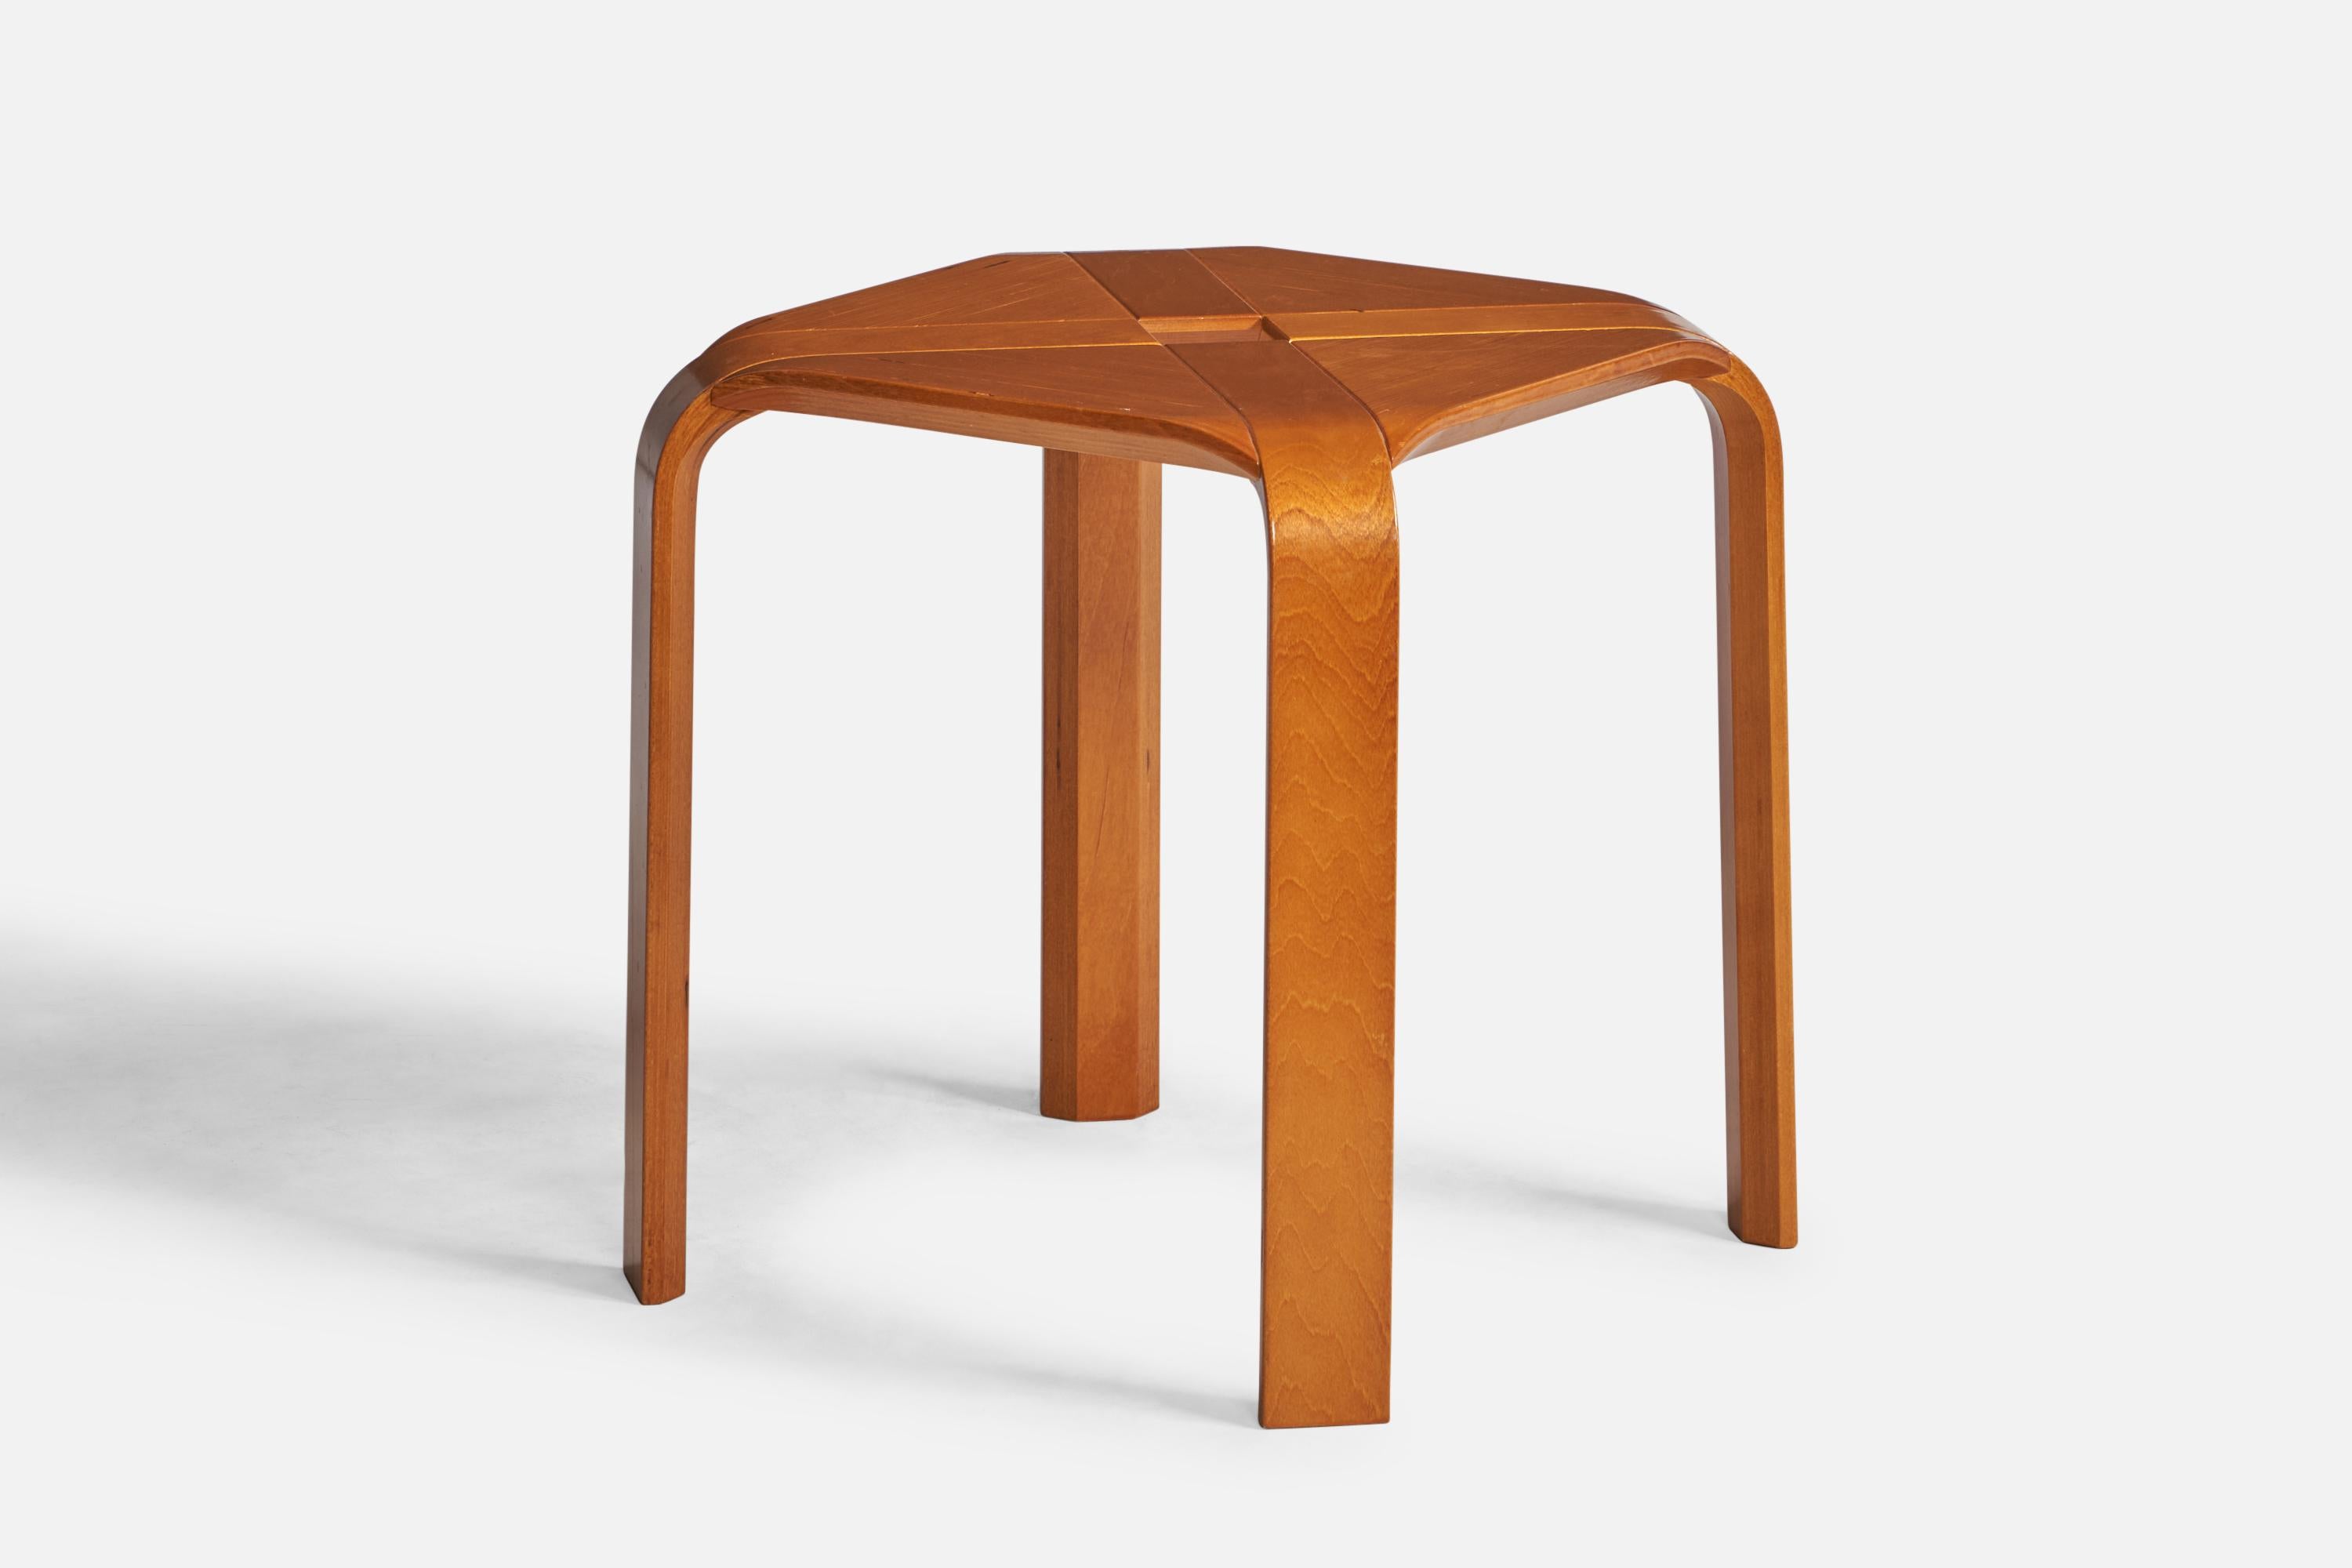 A moulded birch stool designed and produced in Finland, c. 1970s.

Seat height: 16.5”